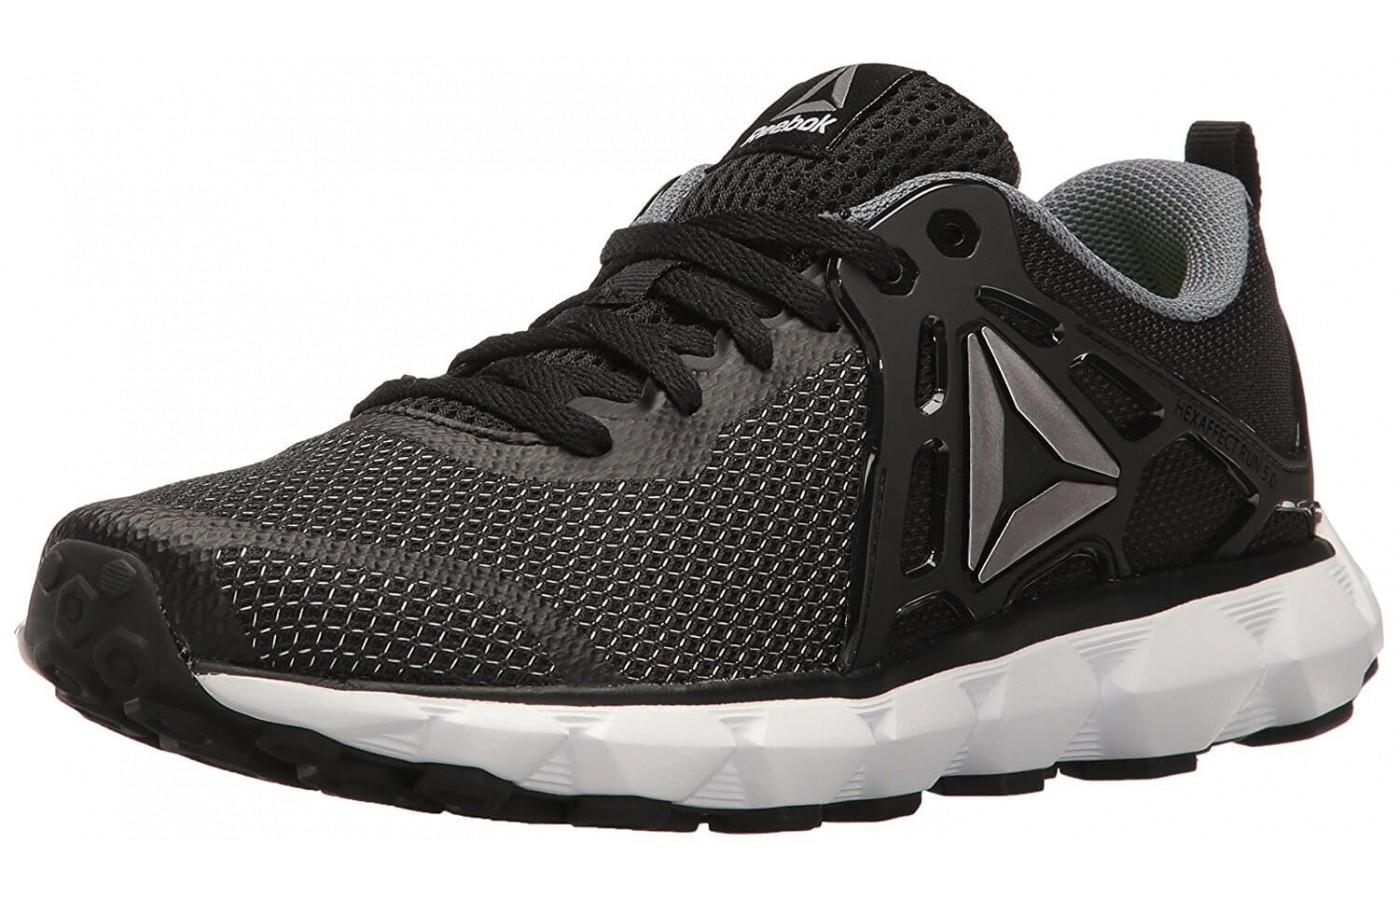 The Reebok Hexaffect Run 5.0 is a comfortable, cushioned shoe